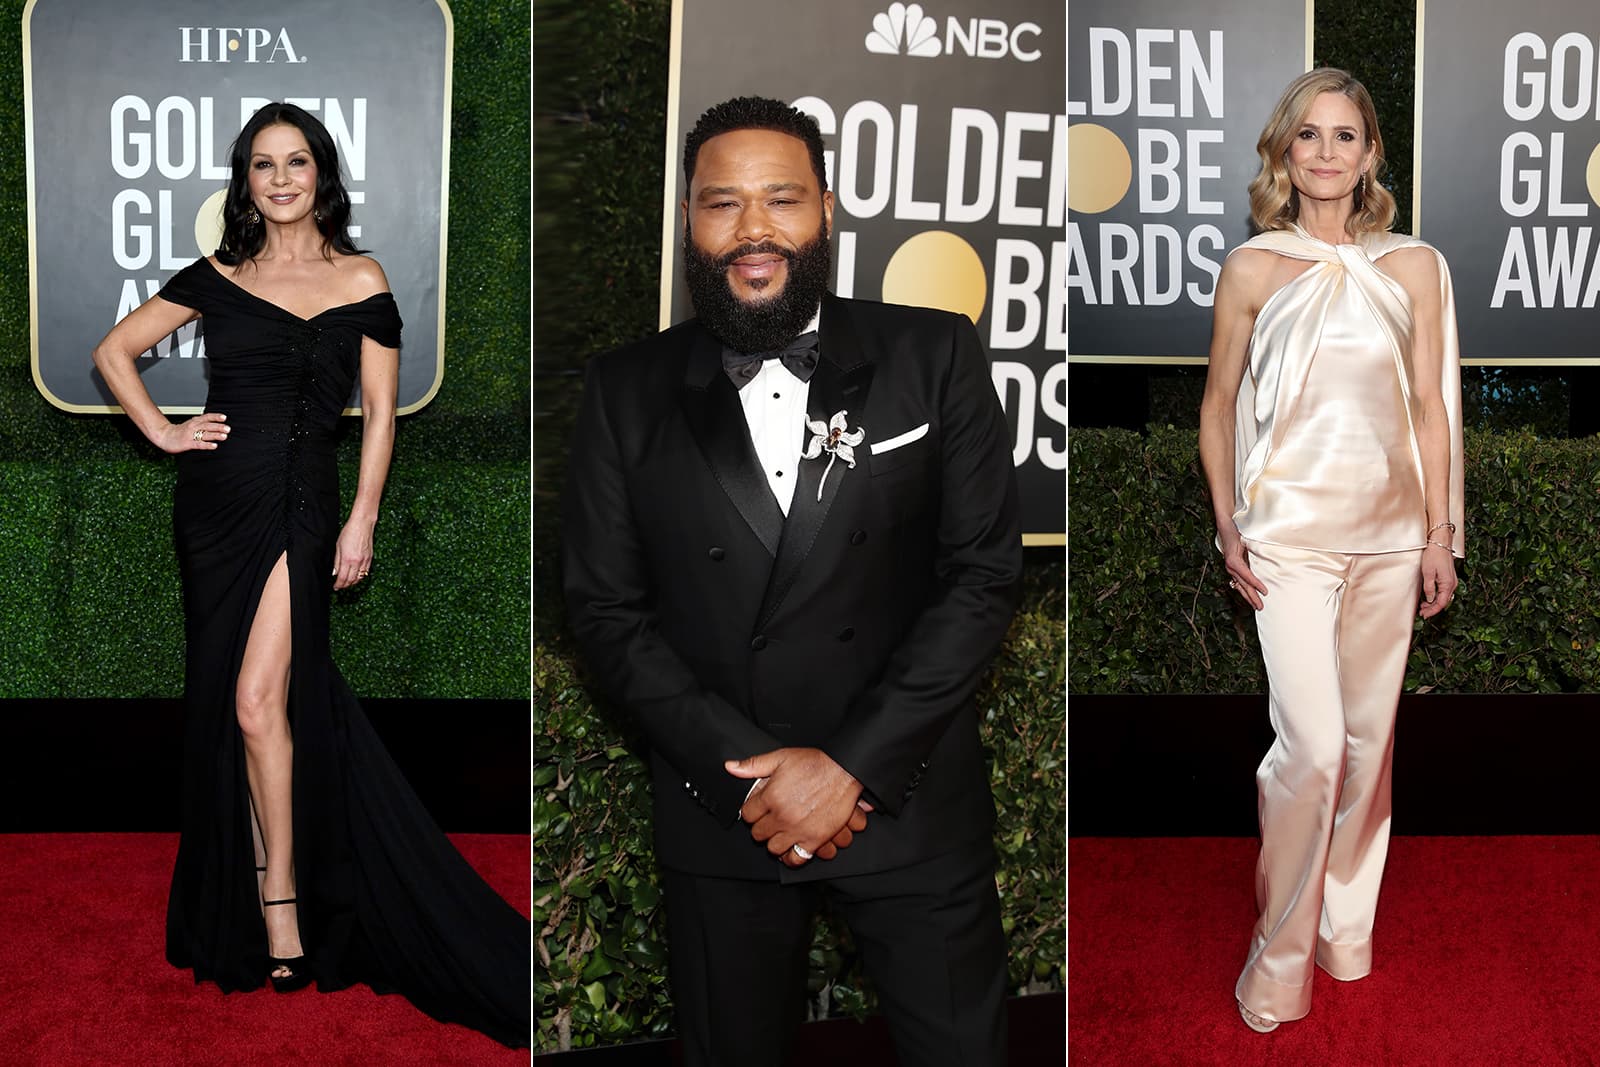 As seen at the Golden Globe Awards 2021: Catherine Zeta-Jones in Chopard earrings and a 5.73 carat diamond ring from the Ice Cube Capsule by Marion Cotillard Collection; Anthony Anderson in a Chopard Haute Joaillerie floral brooch with a 19.83 carat brown diamond; and Kyra Sedgwick in fancy coloured diamond earring and rings, all by Chopard